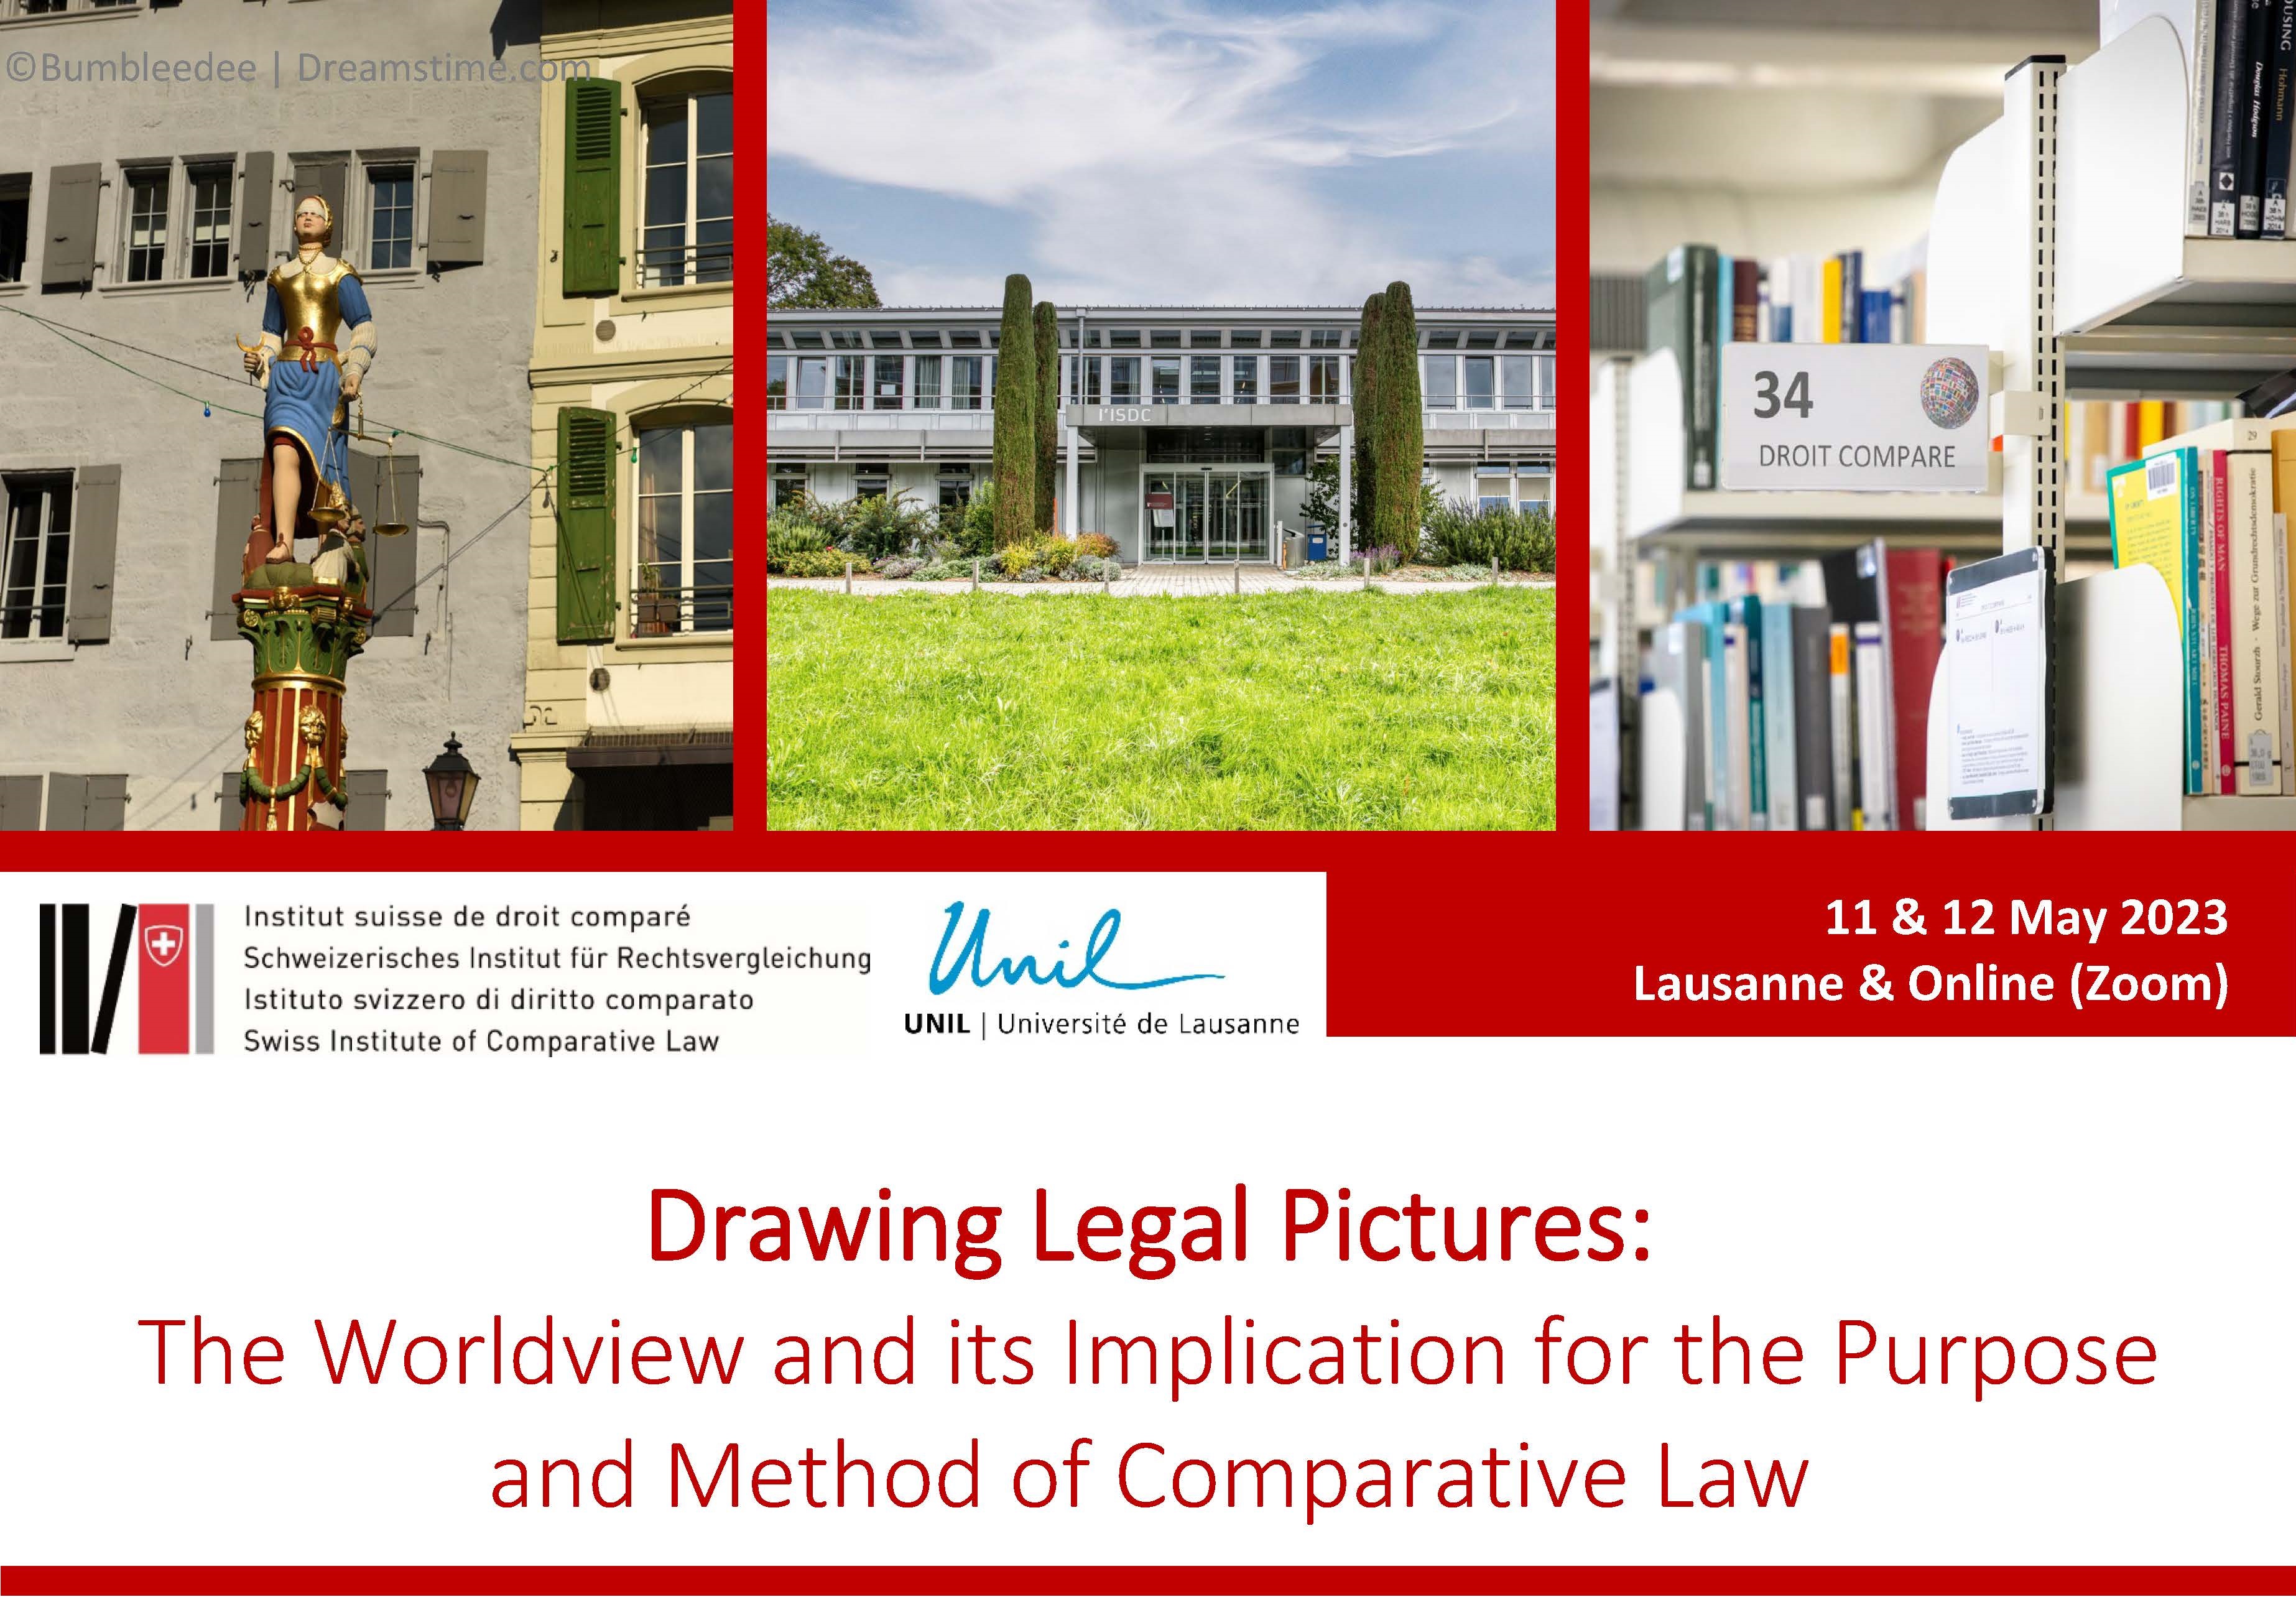 Drawing Legal Pictures: The Worldview and its Implication for the Purpose and Method of Comparative Law